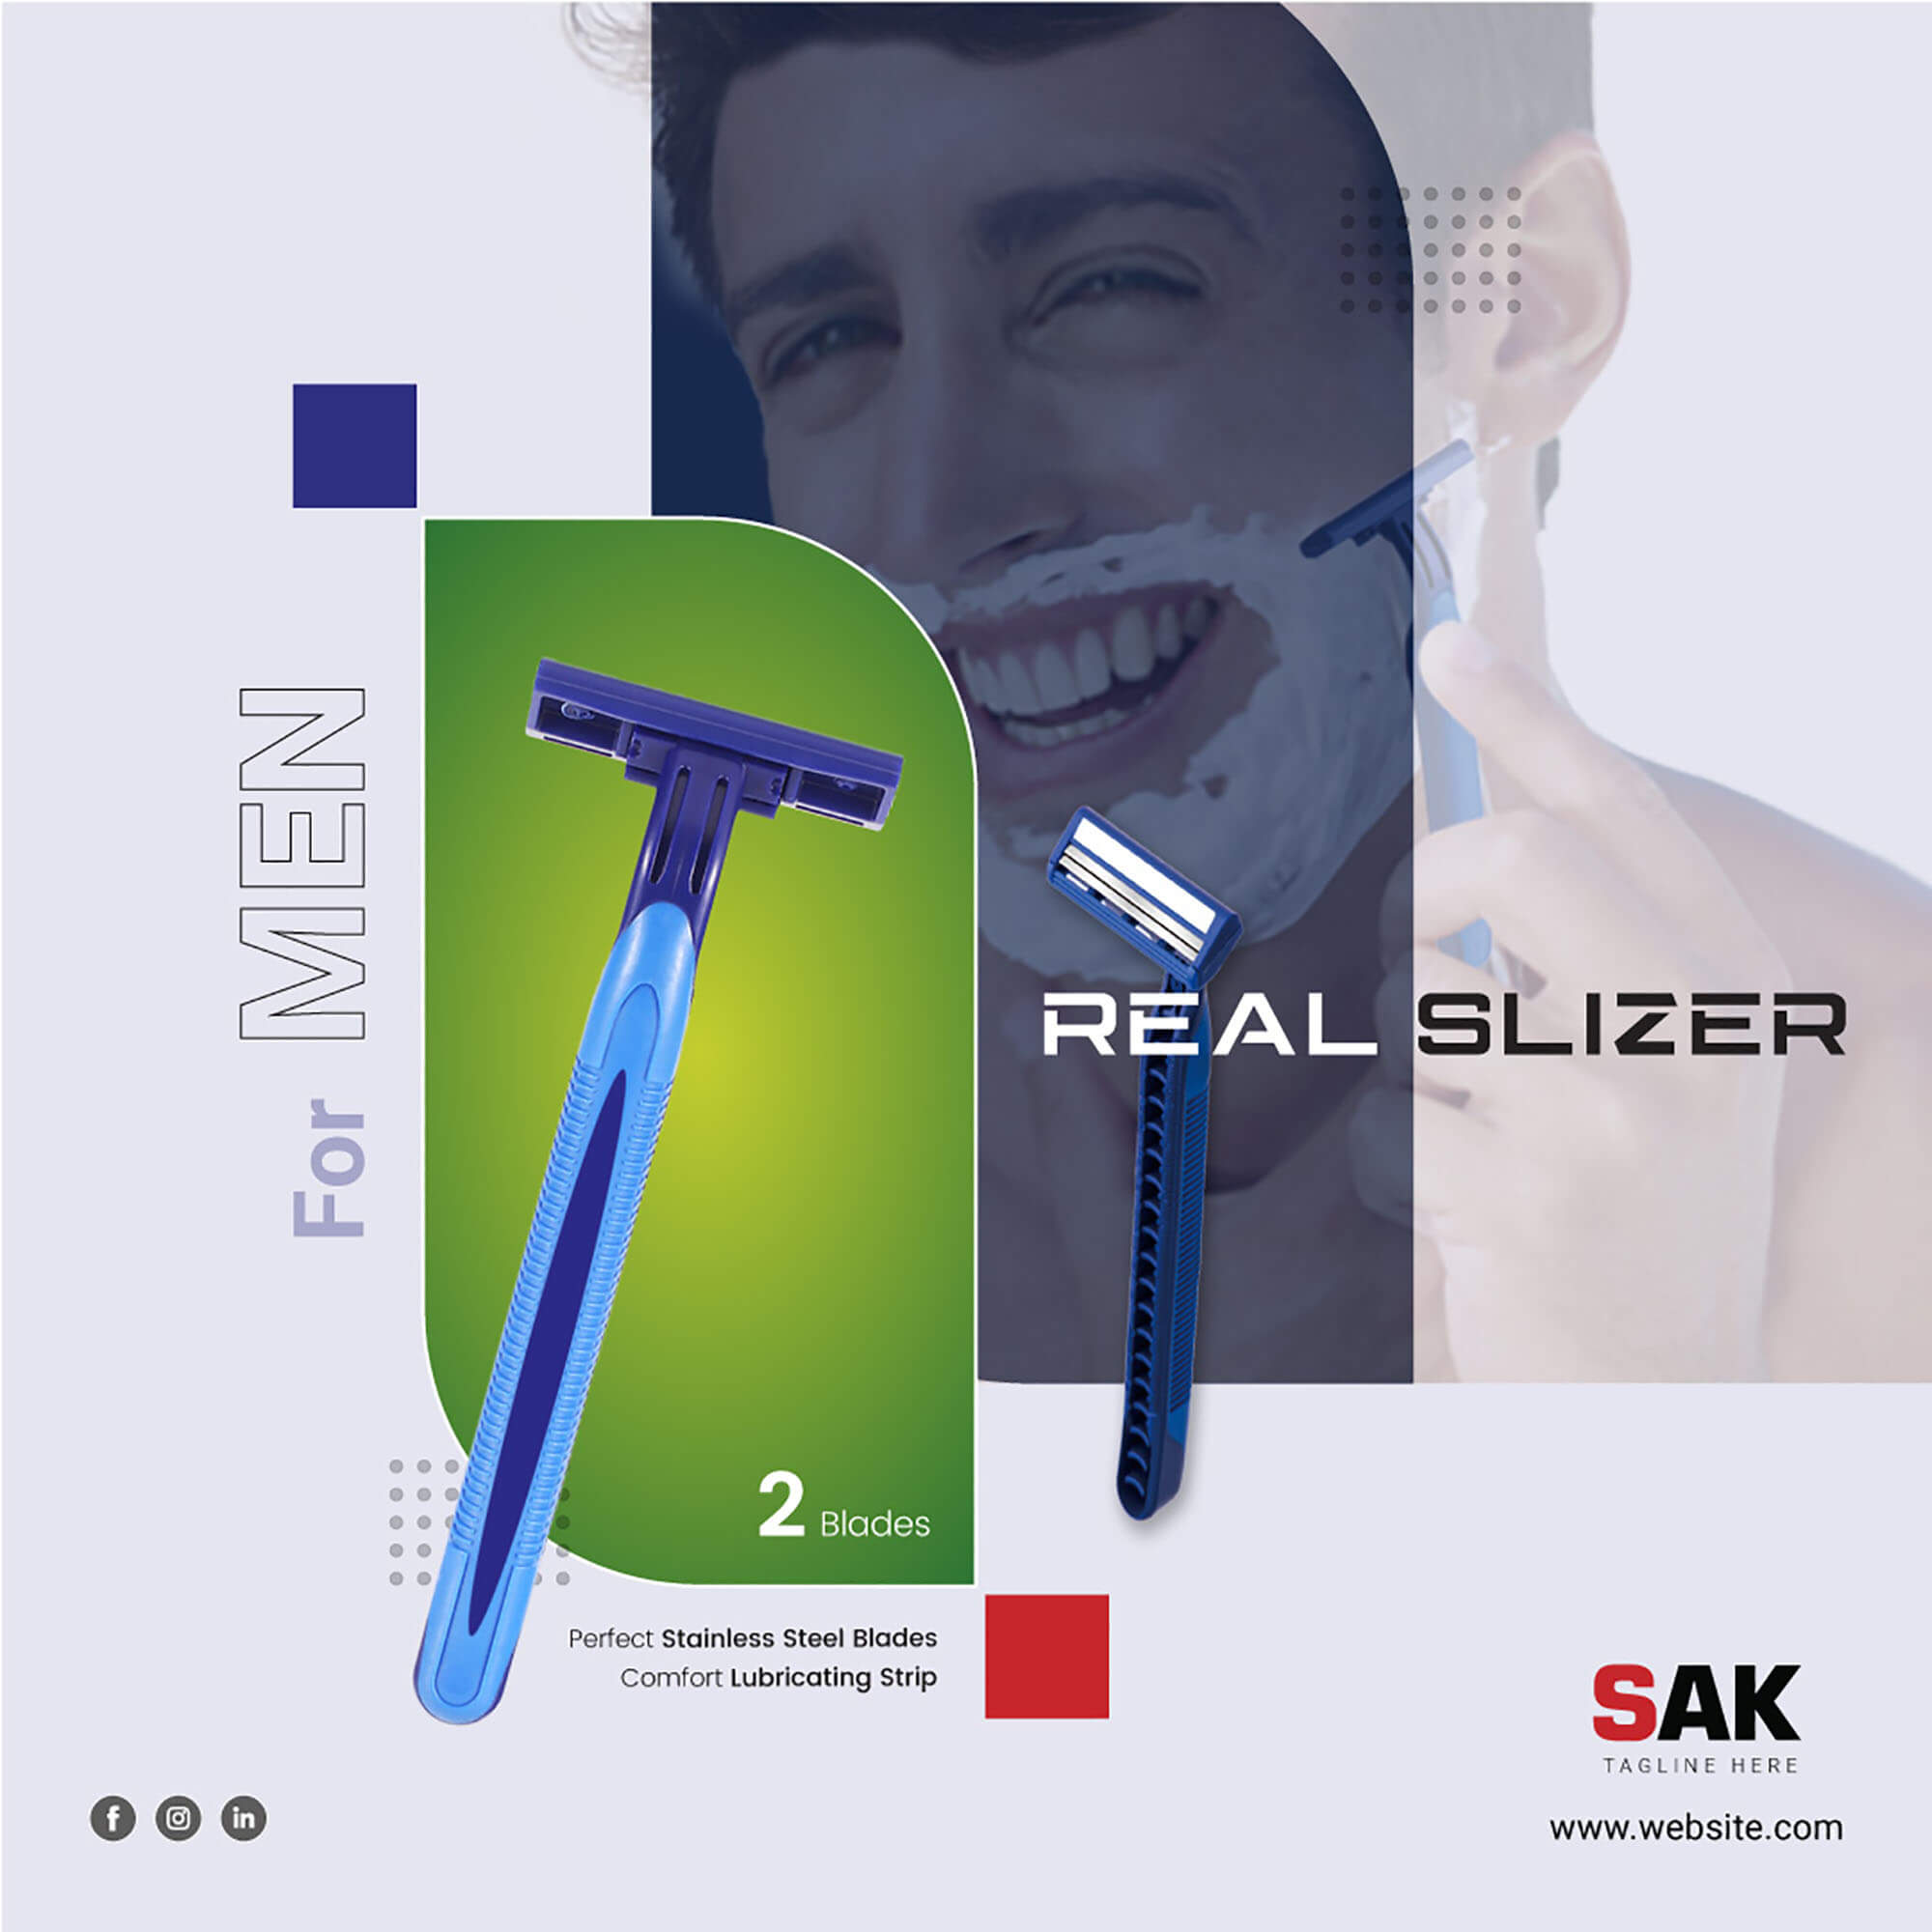 Picture of a man shaving his face with a razor.